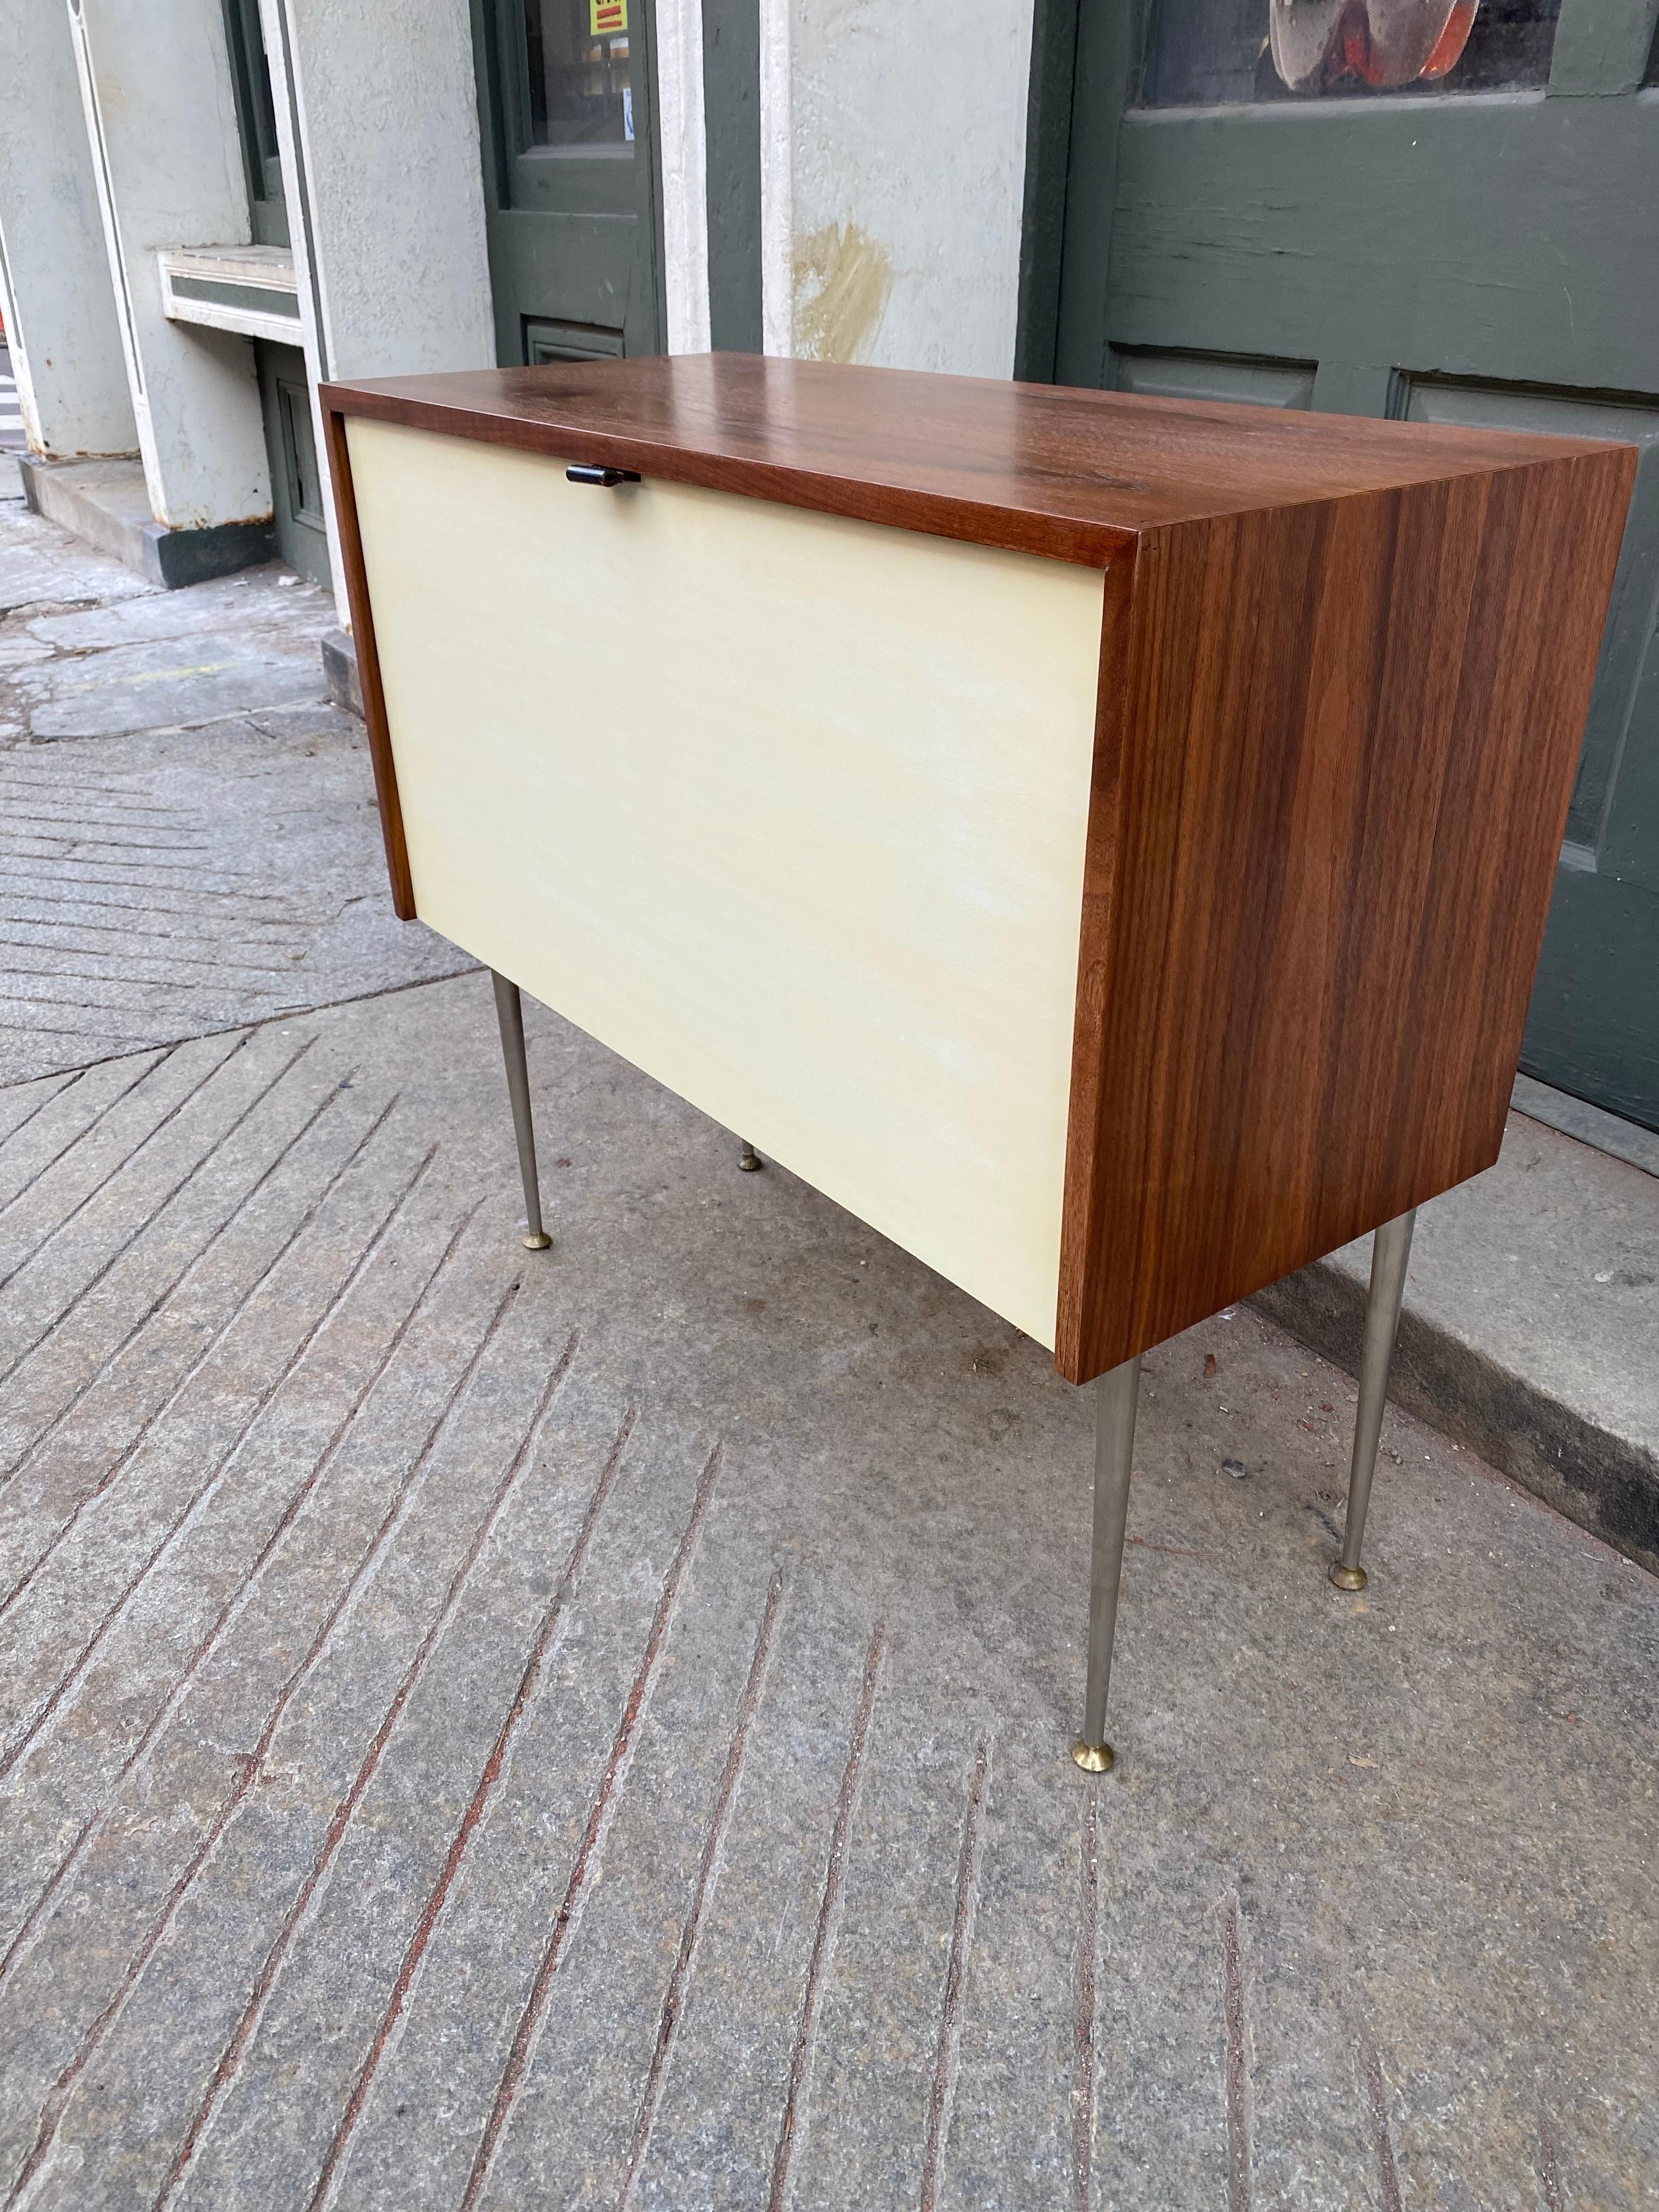 Florence Knoll for Knoll Hanging or standing Cabinet.  Always meant to hang from the wall, last used as a bar.  Added feet for ease of placement.  Walnut outer cabinet, and cream colored door that folds down.  Adjustable shelf and open area on right